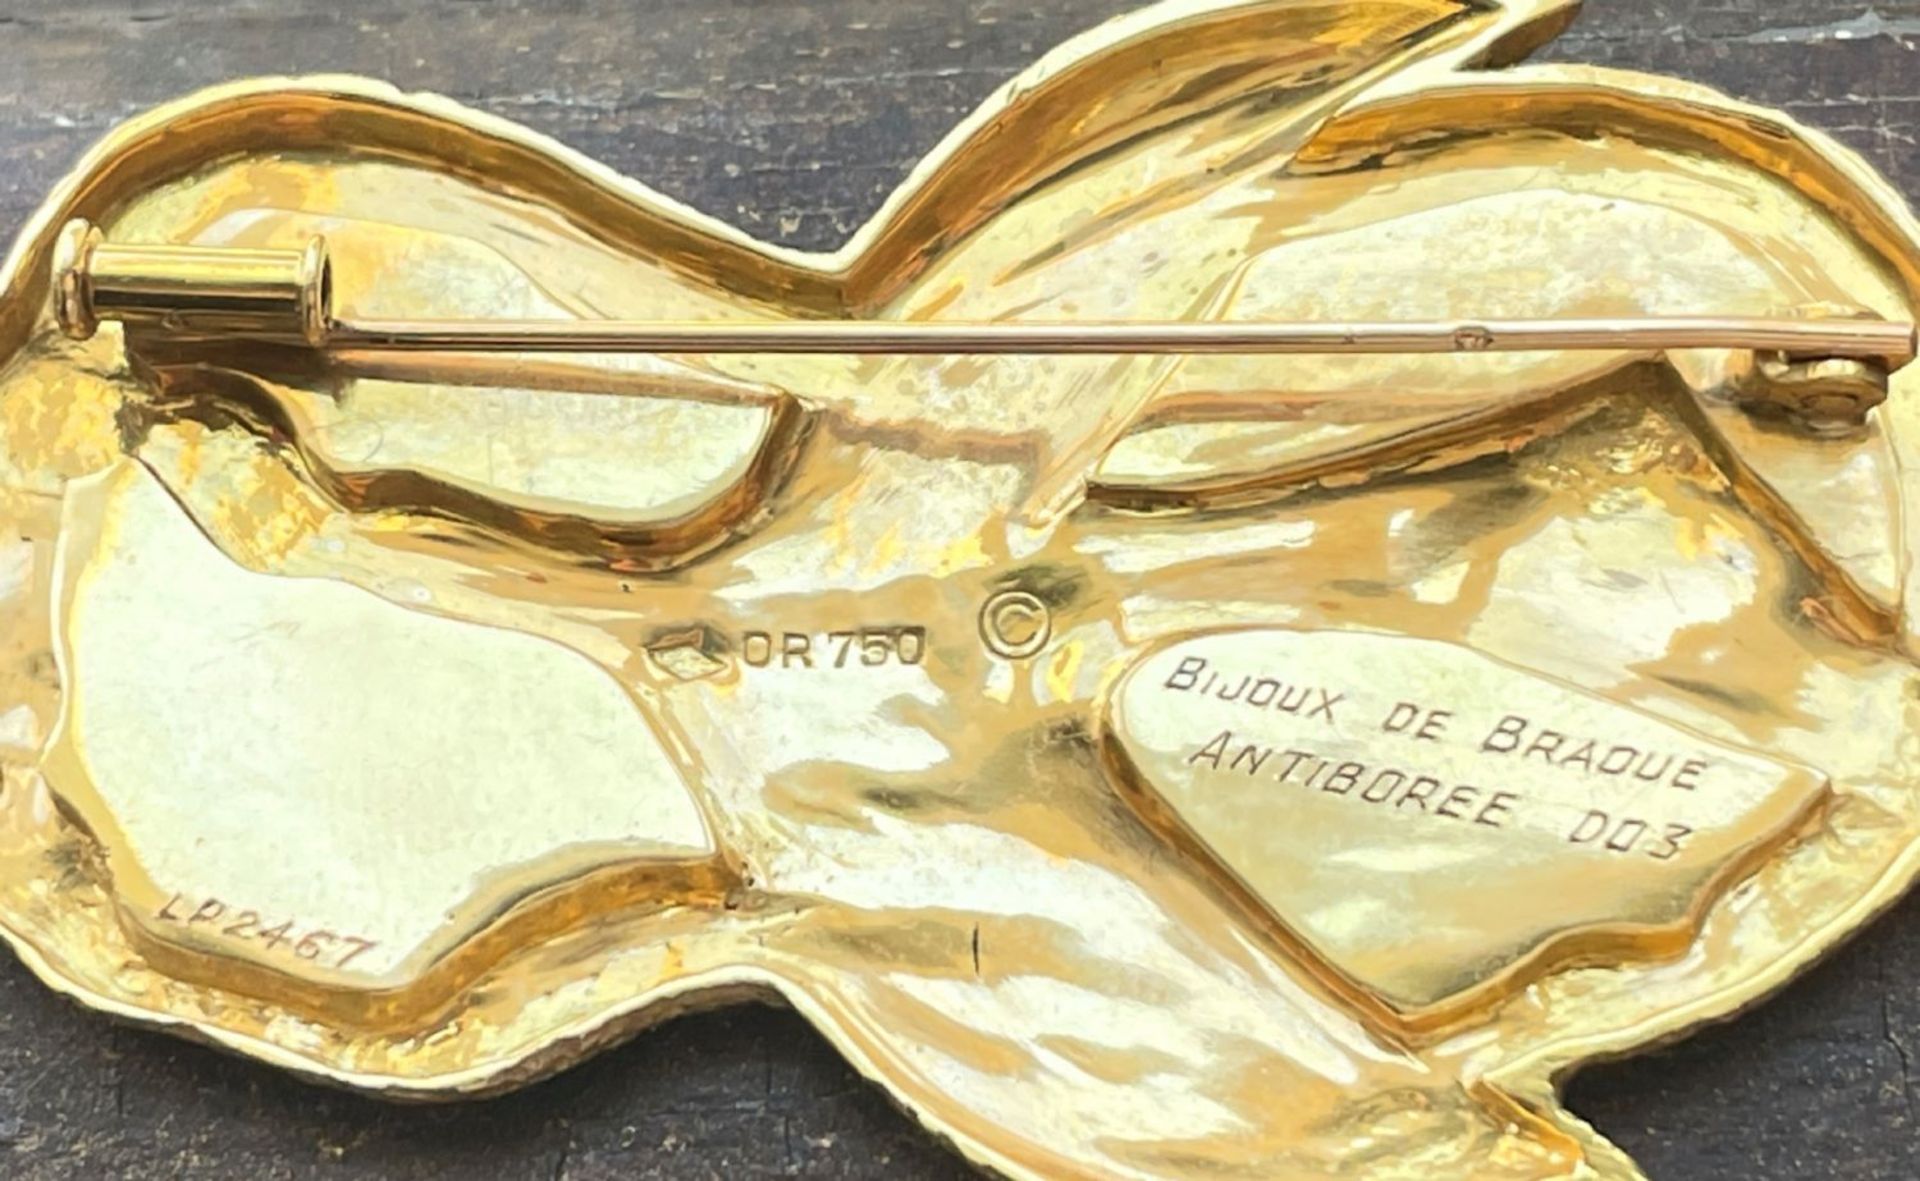 18k gold textured brooch designed by Georges Braque, a rare 18k gold textured brooch from 1963, a - Image 9 of 14